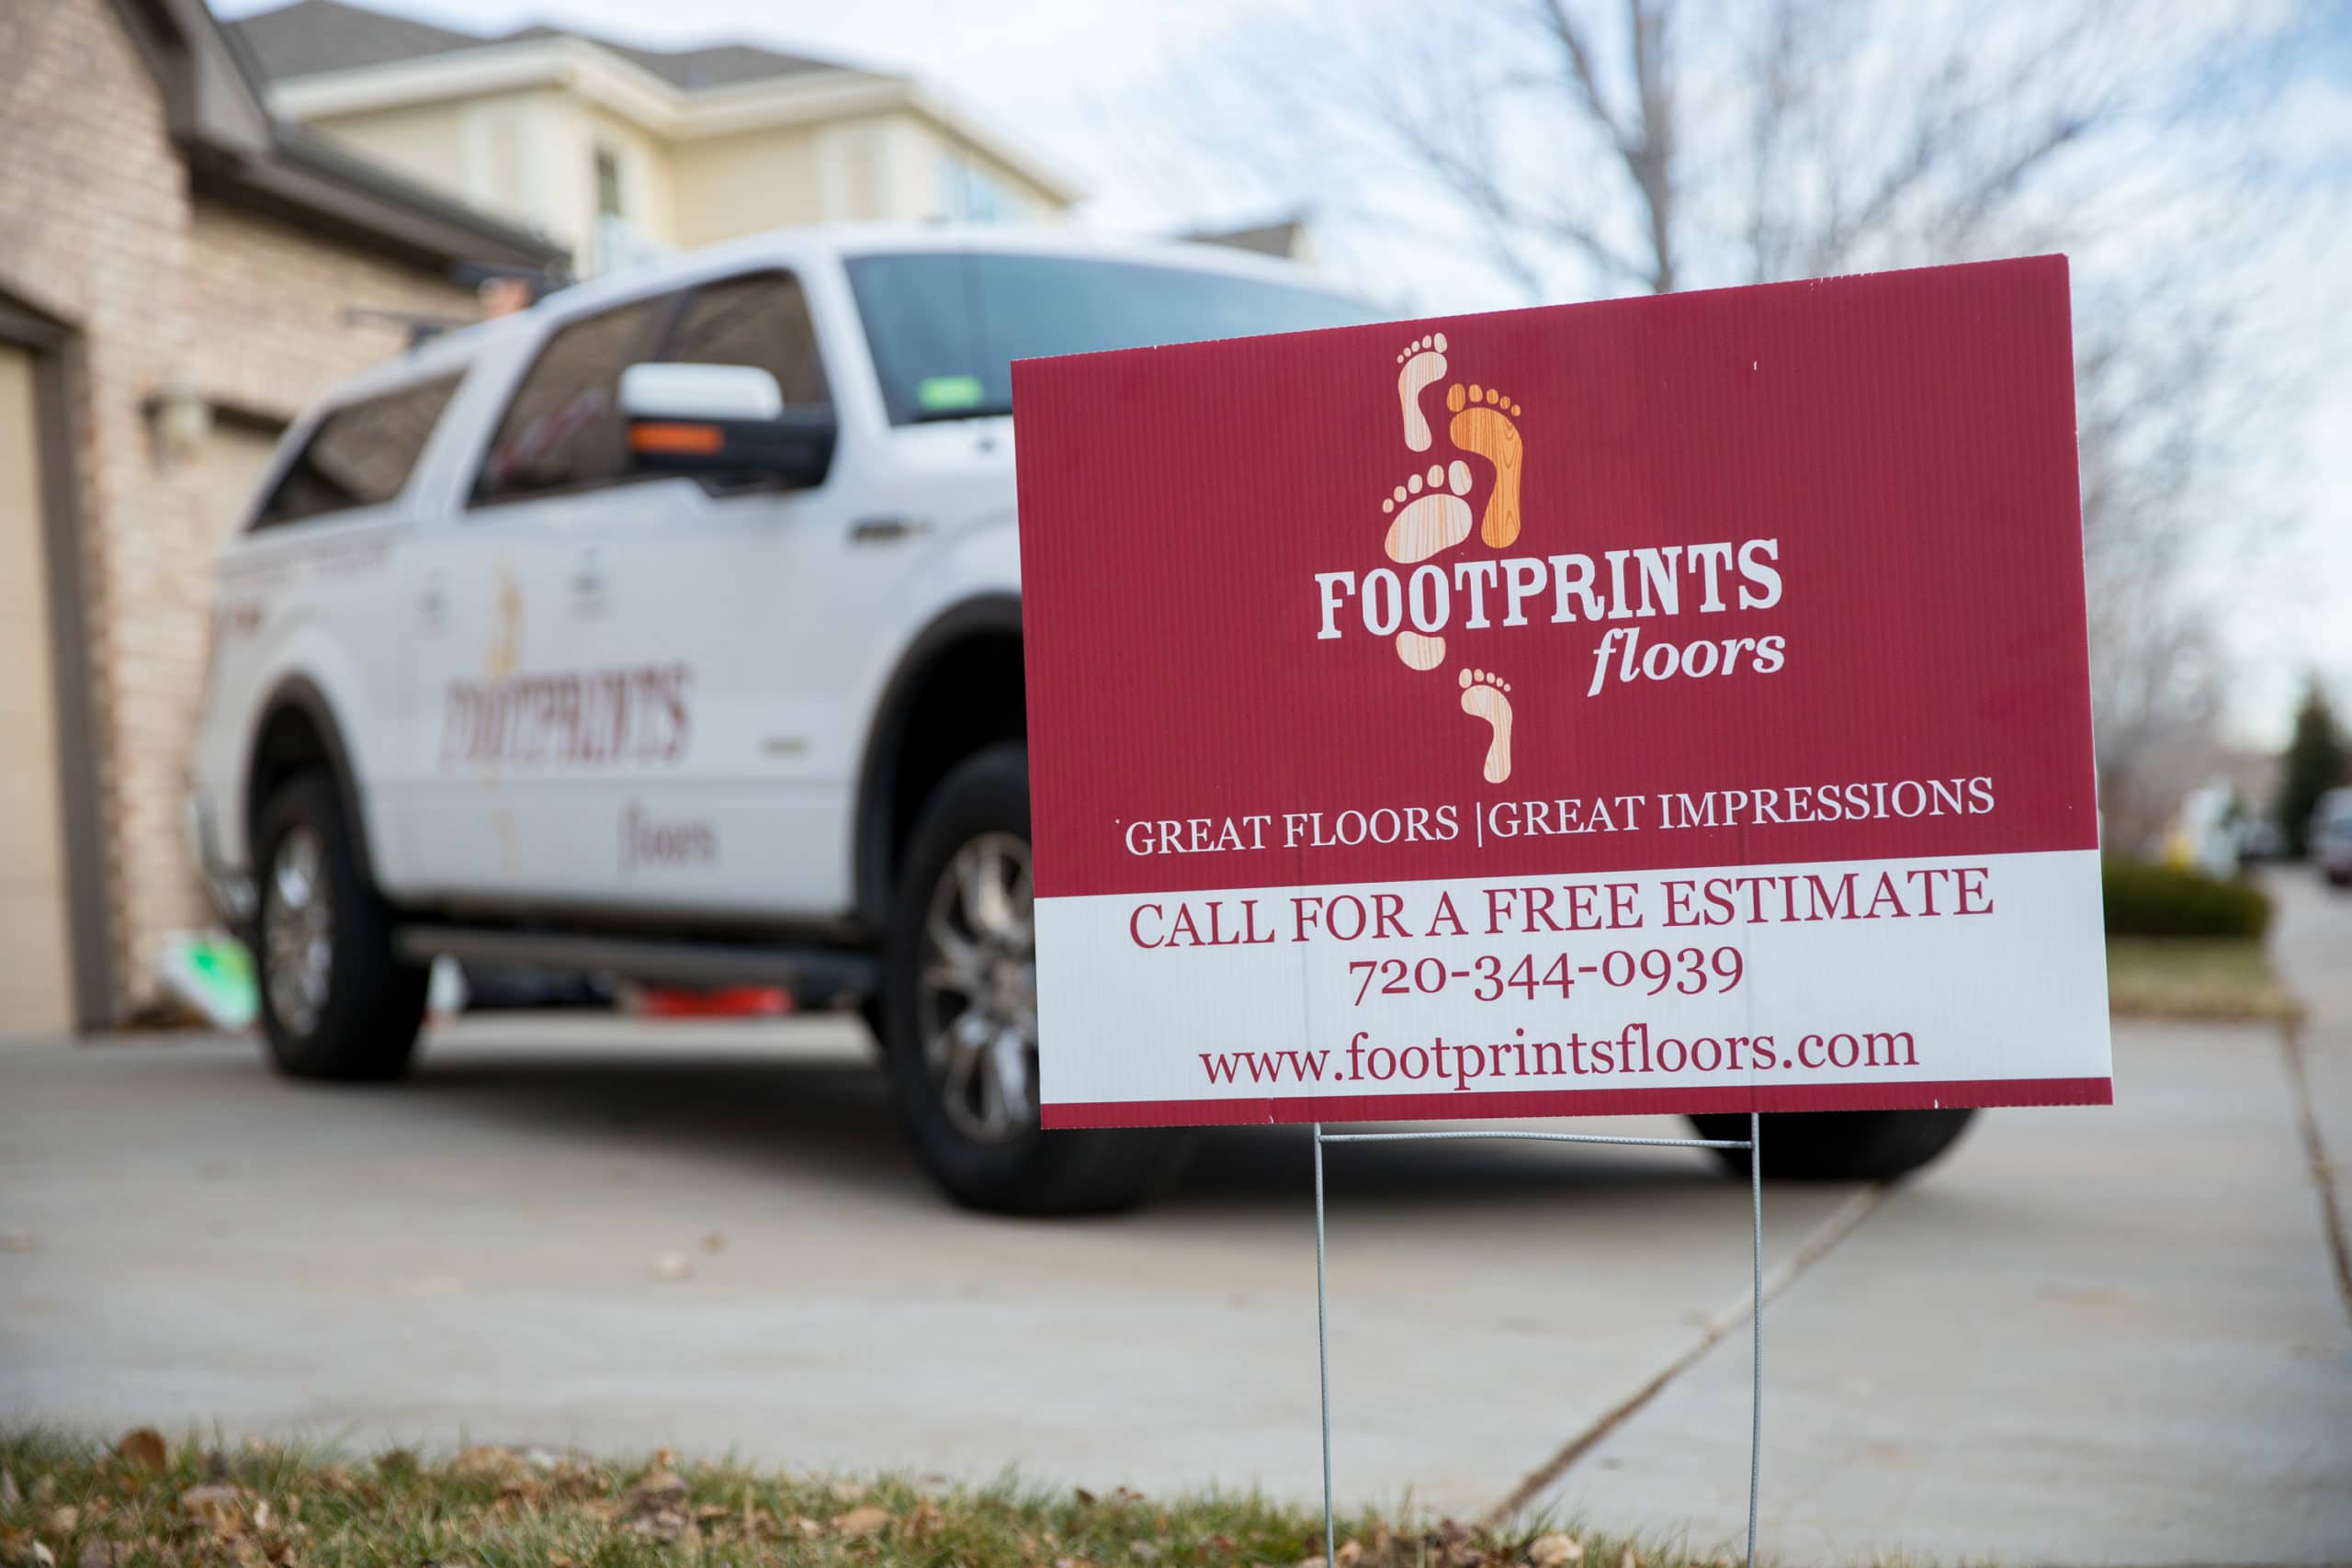 Footprints Floors home improvement franchise sign in front yard showing the community support for the home improvement industry.